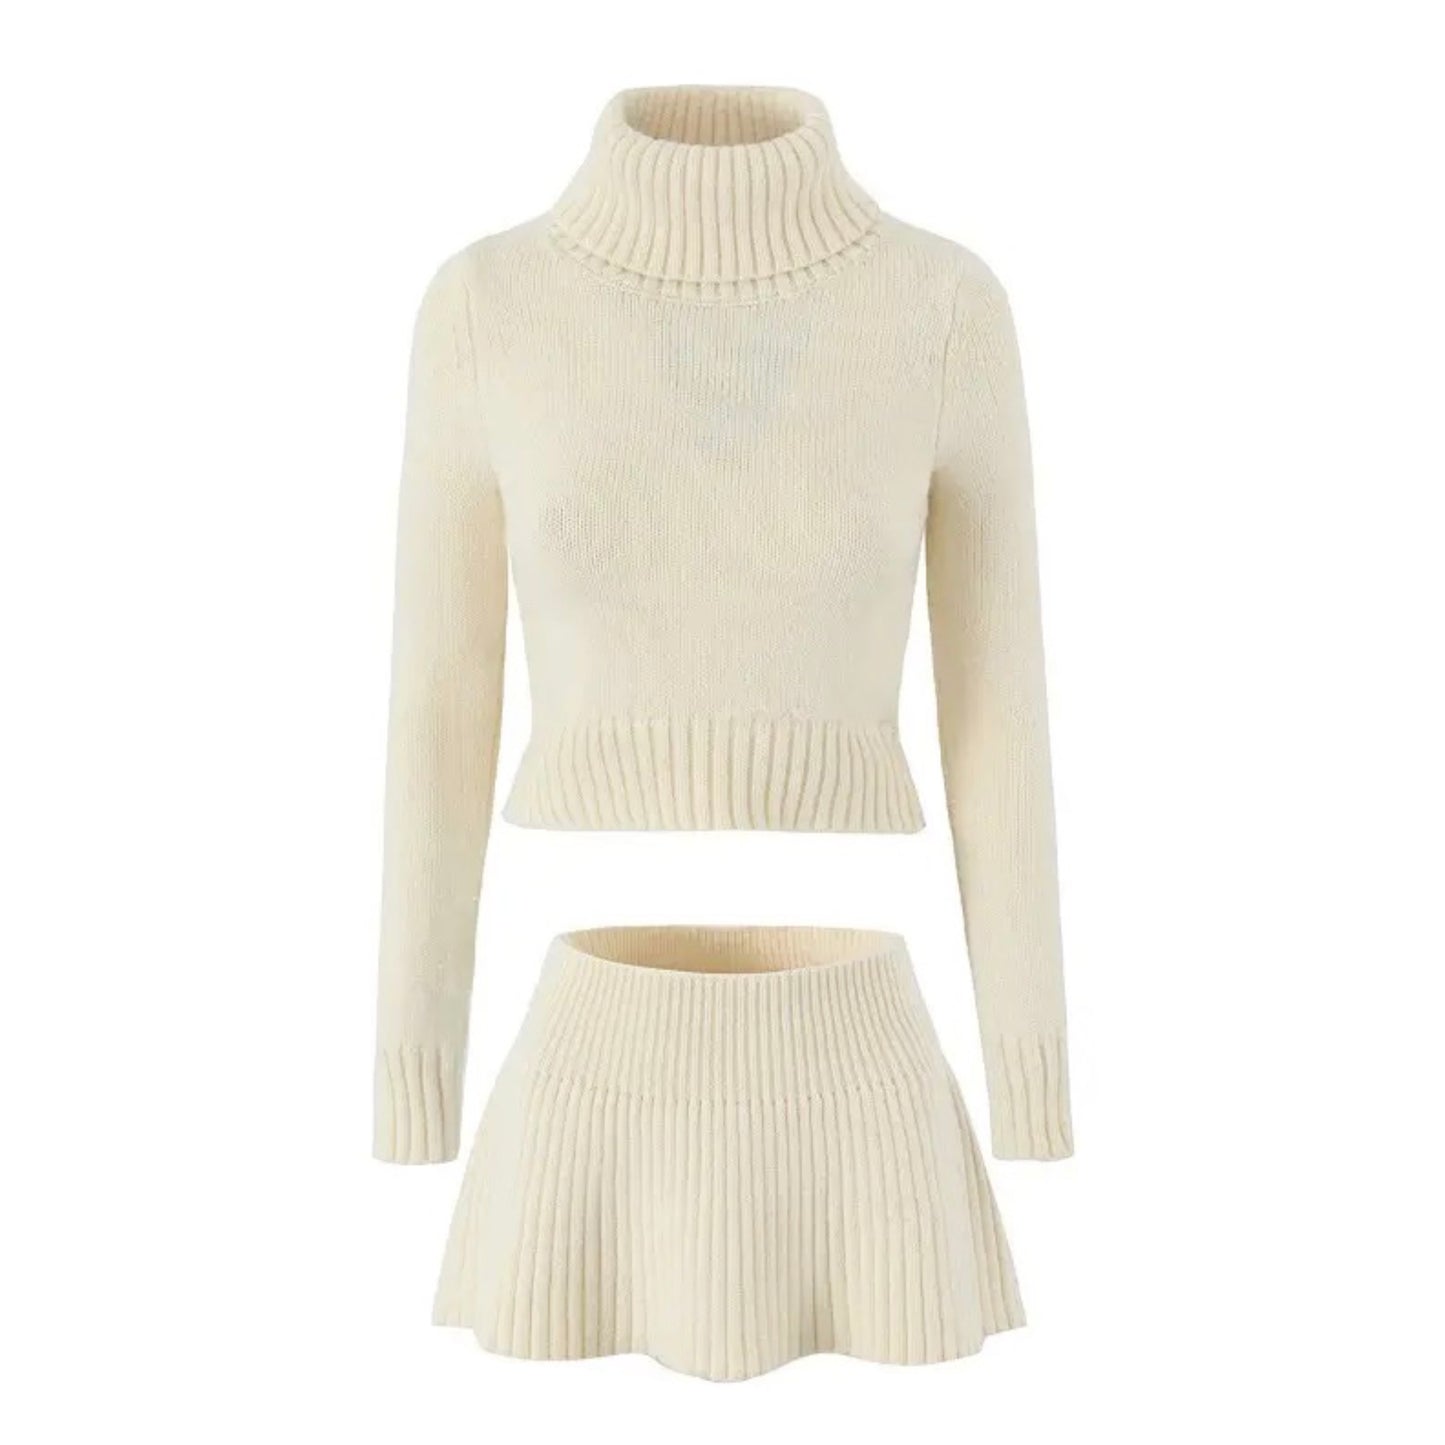 Beige Knit Fitted Sweater & Skirt Set